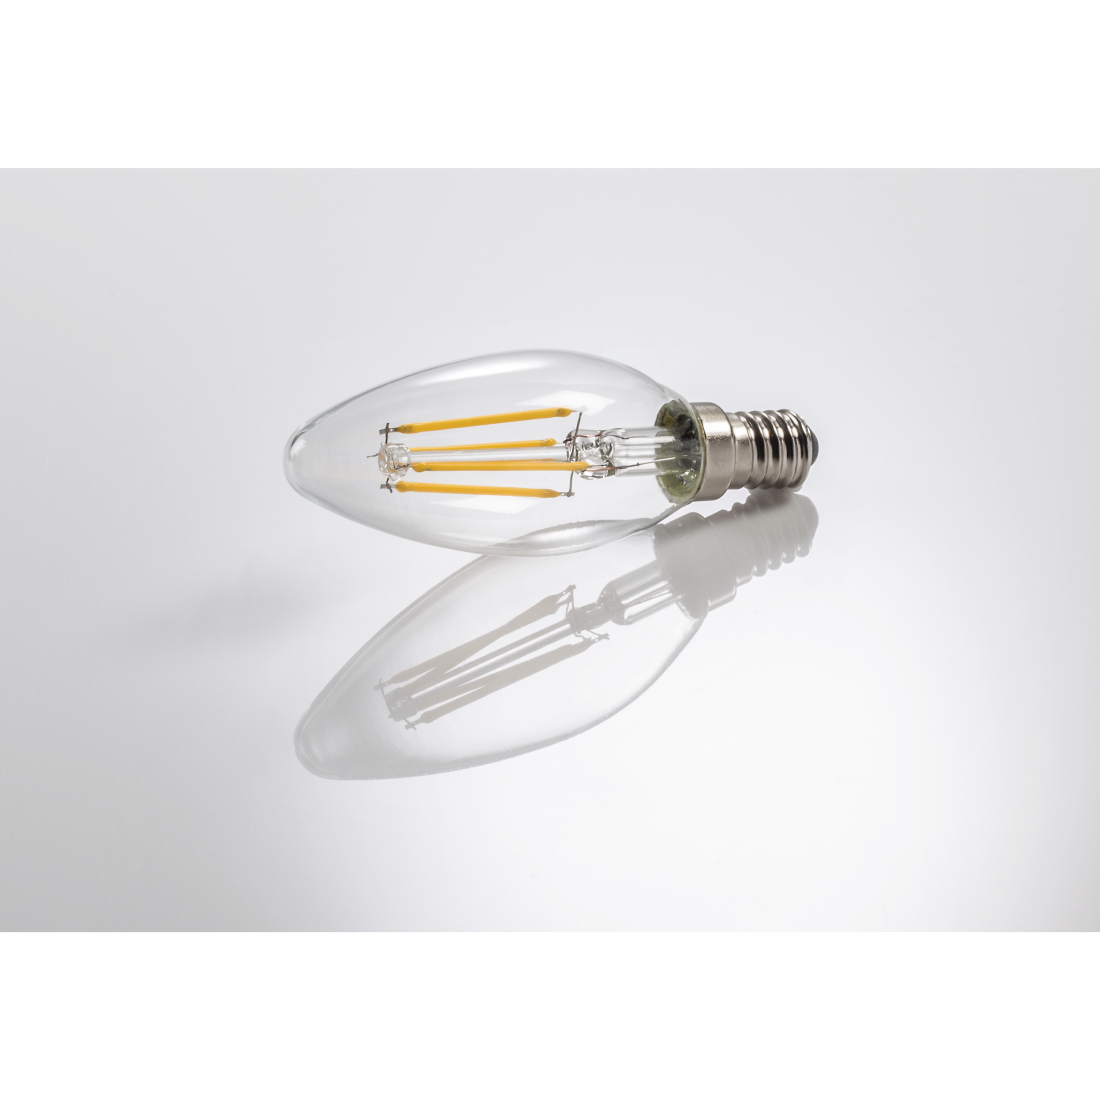 abx3 High-Res Image 3 - Xavax, LED Filament, E14, 470 lm Replaces 40 W, Candle Bulb, warm white, clear